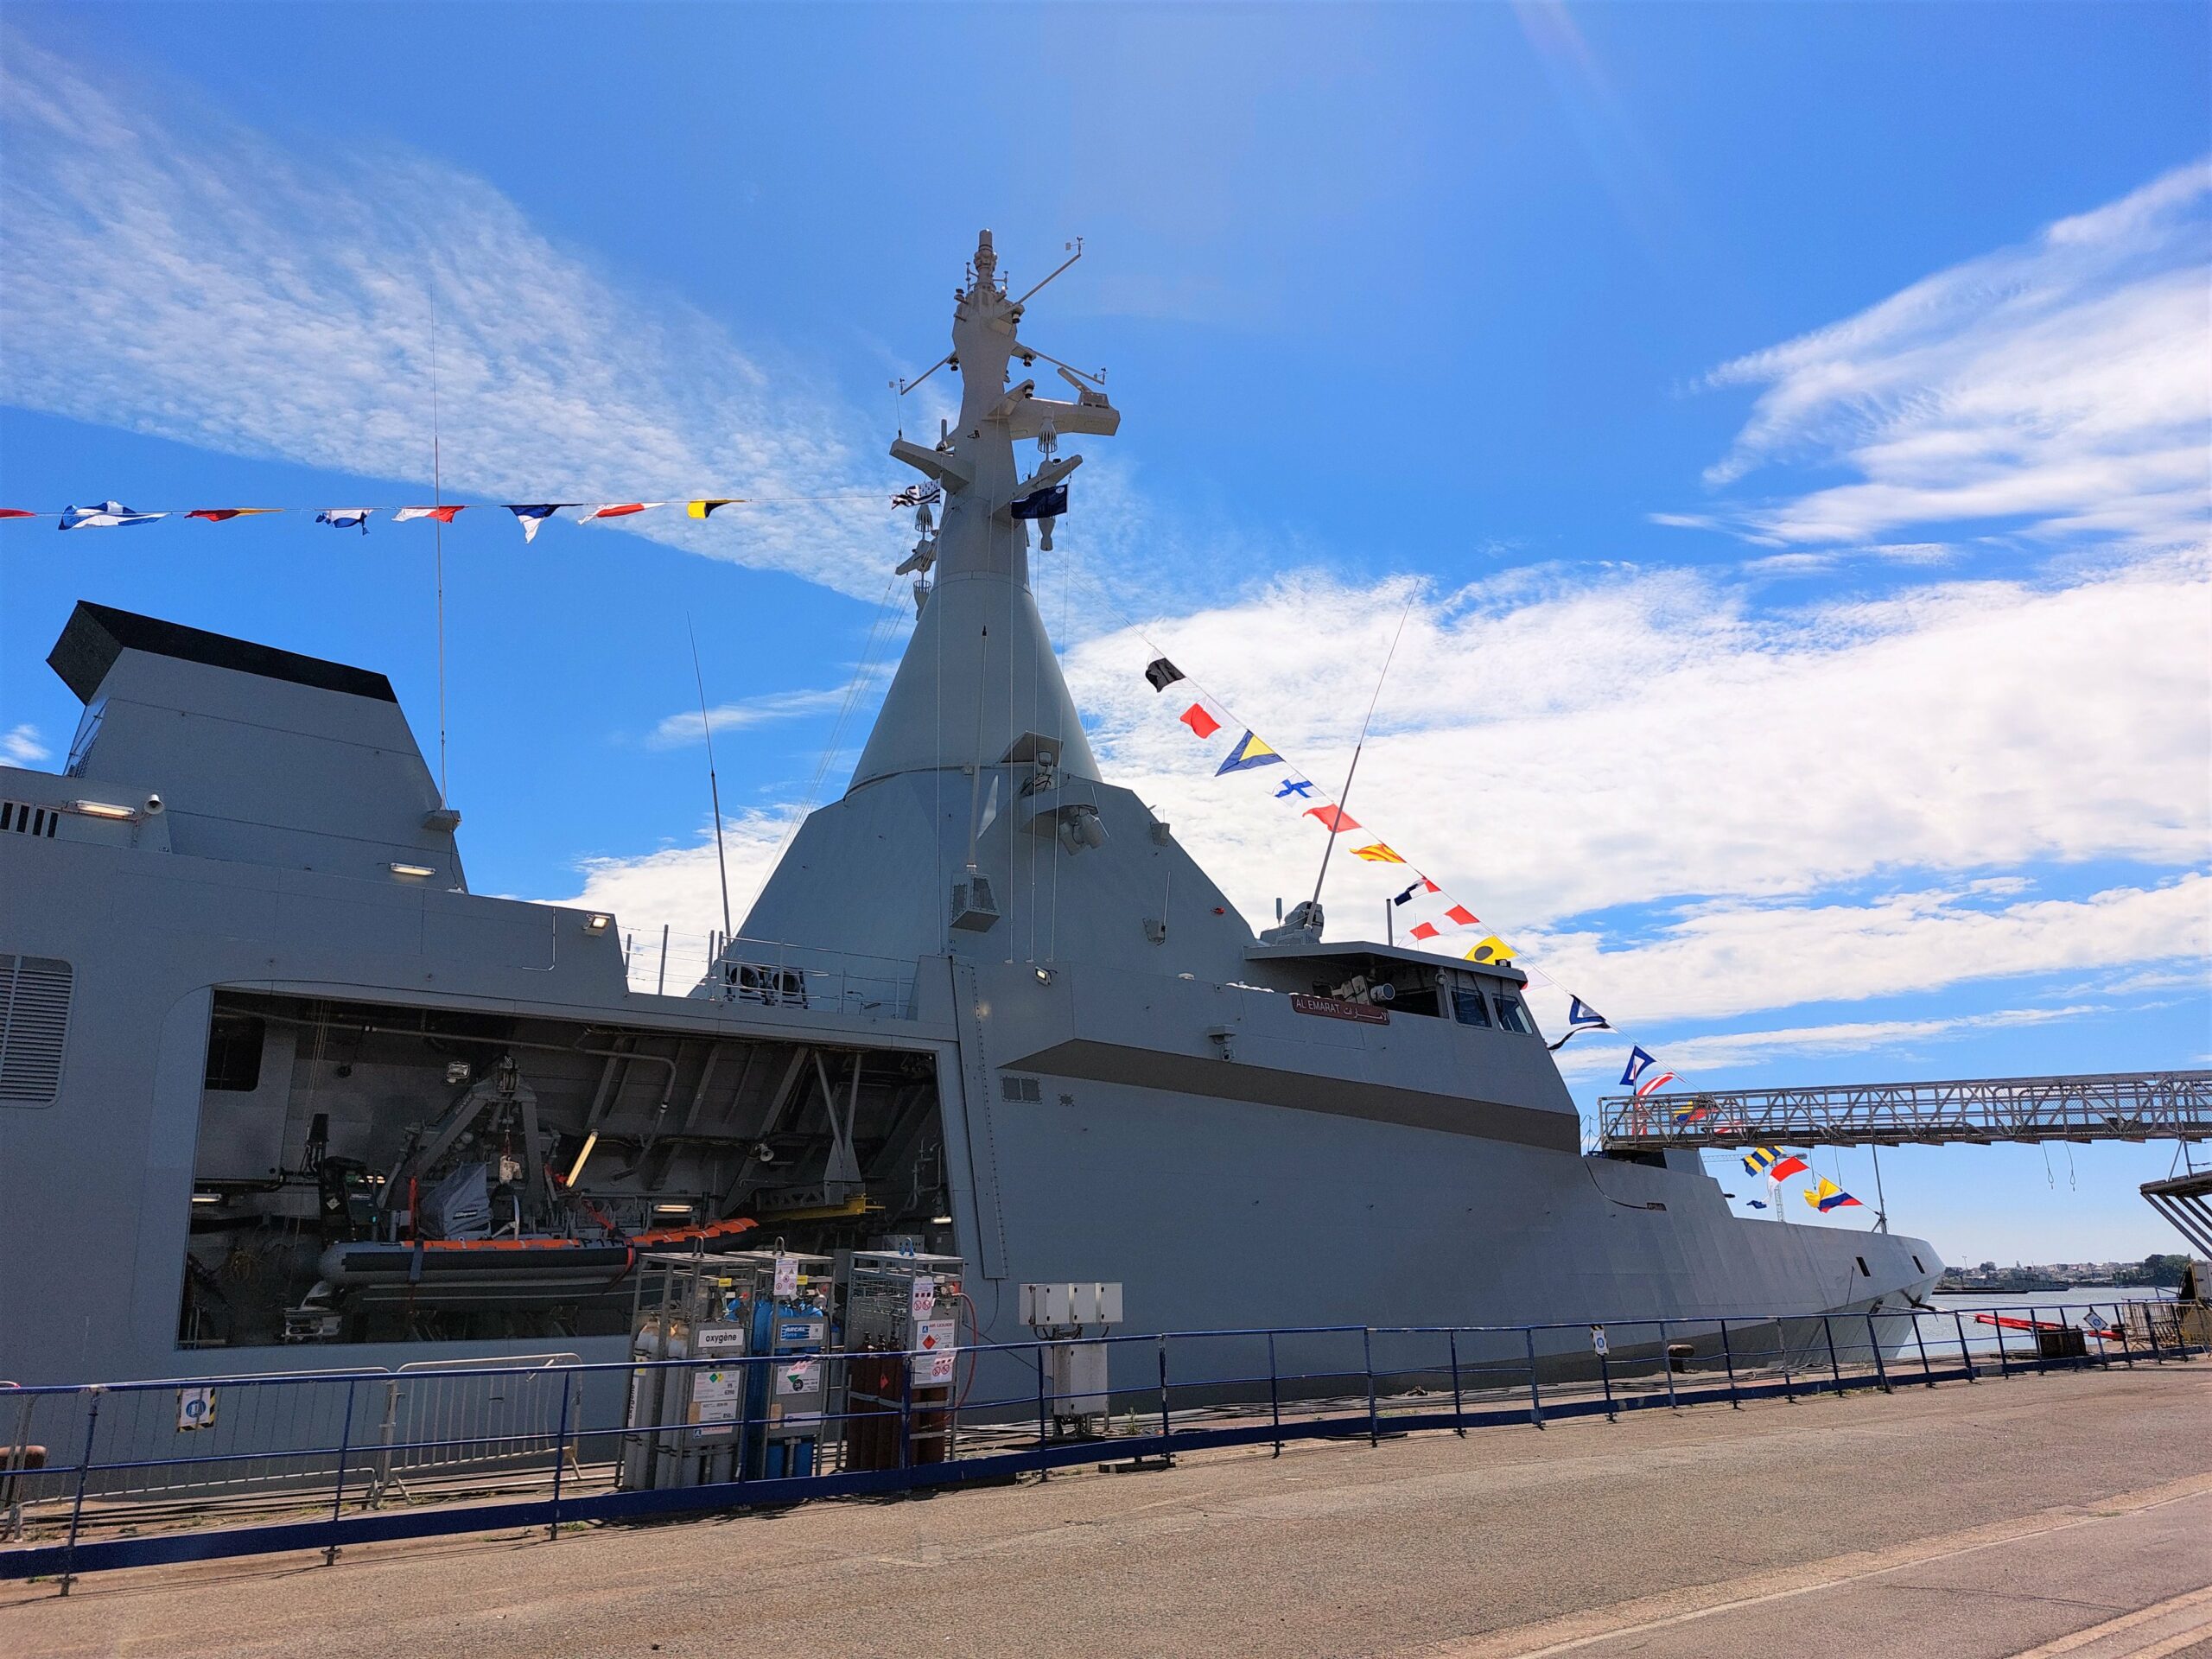 Al Emarat, the UAE Navy's second Gowind-class corvette, is seen docked at a pier. The ship is decorated with colors and flags attached to a banner hoisted up the ship's mast.